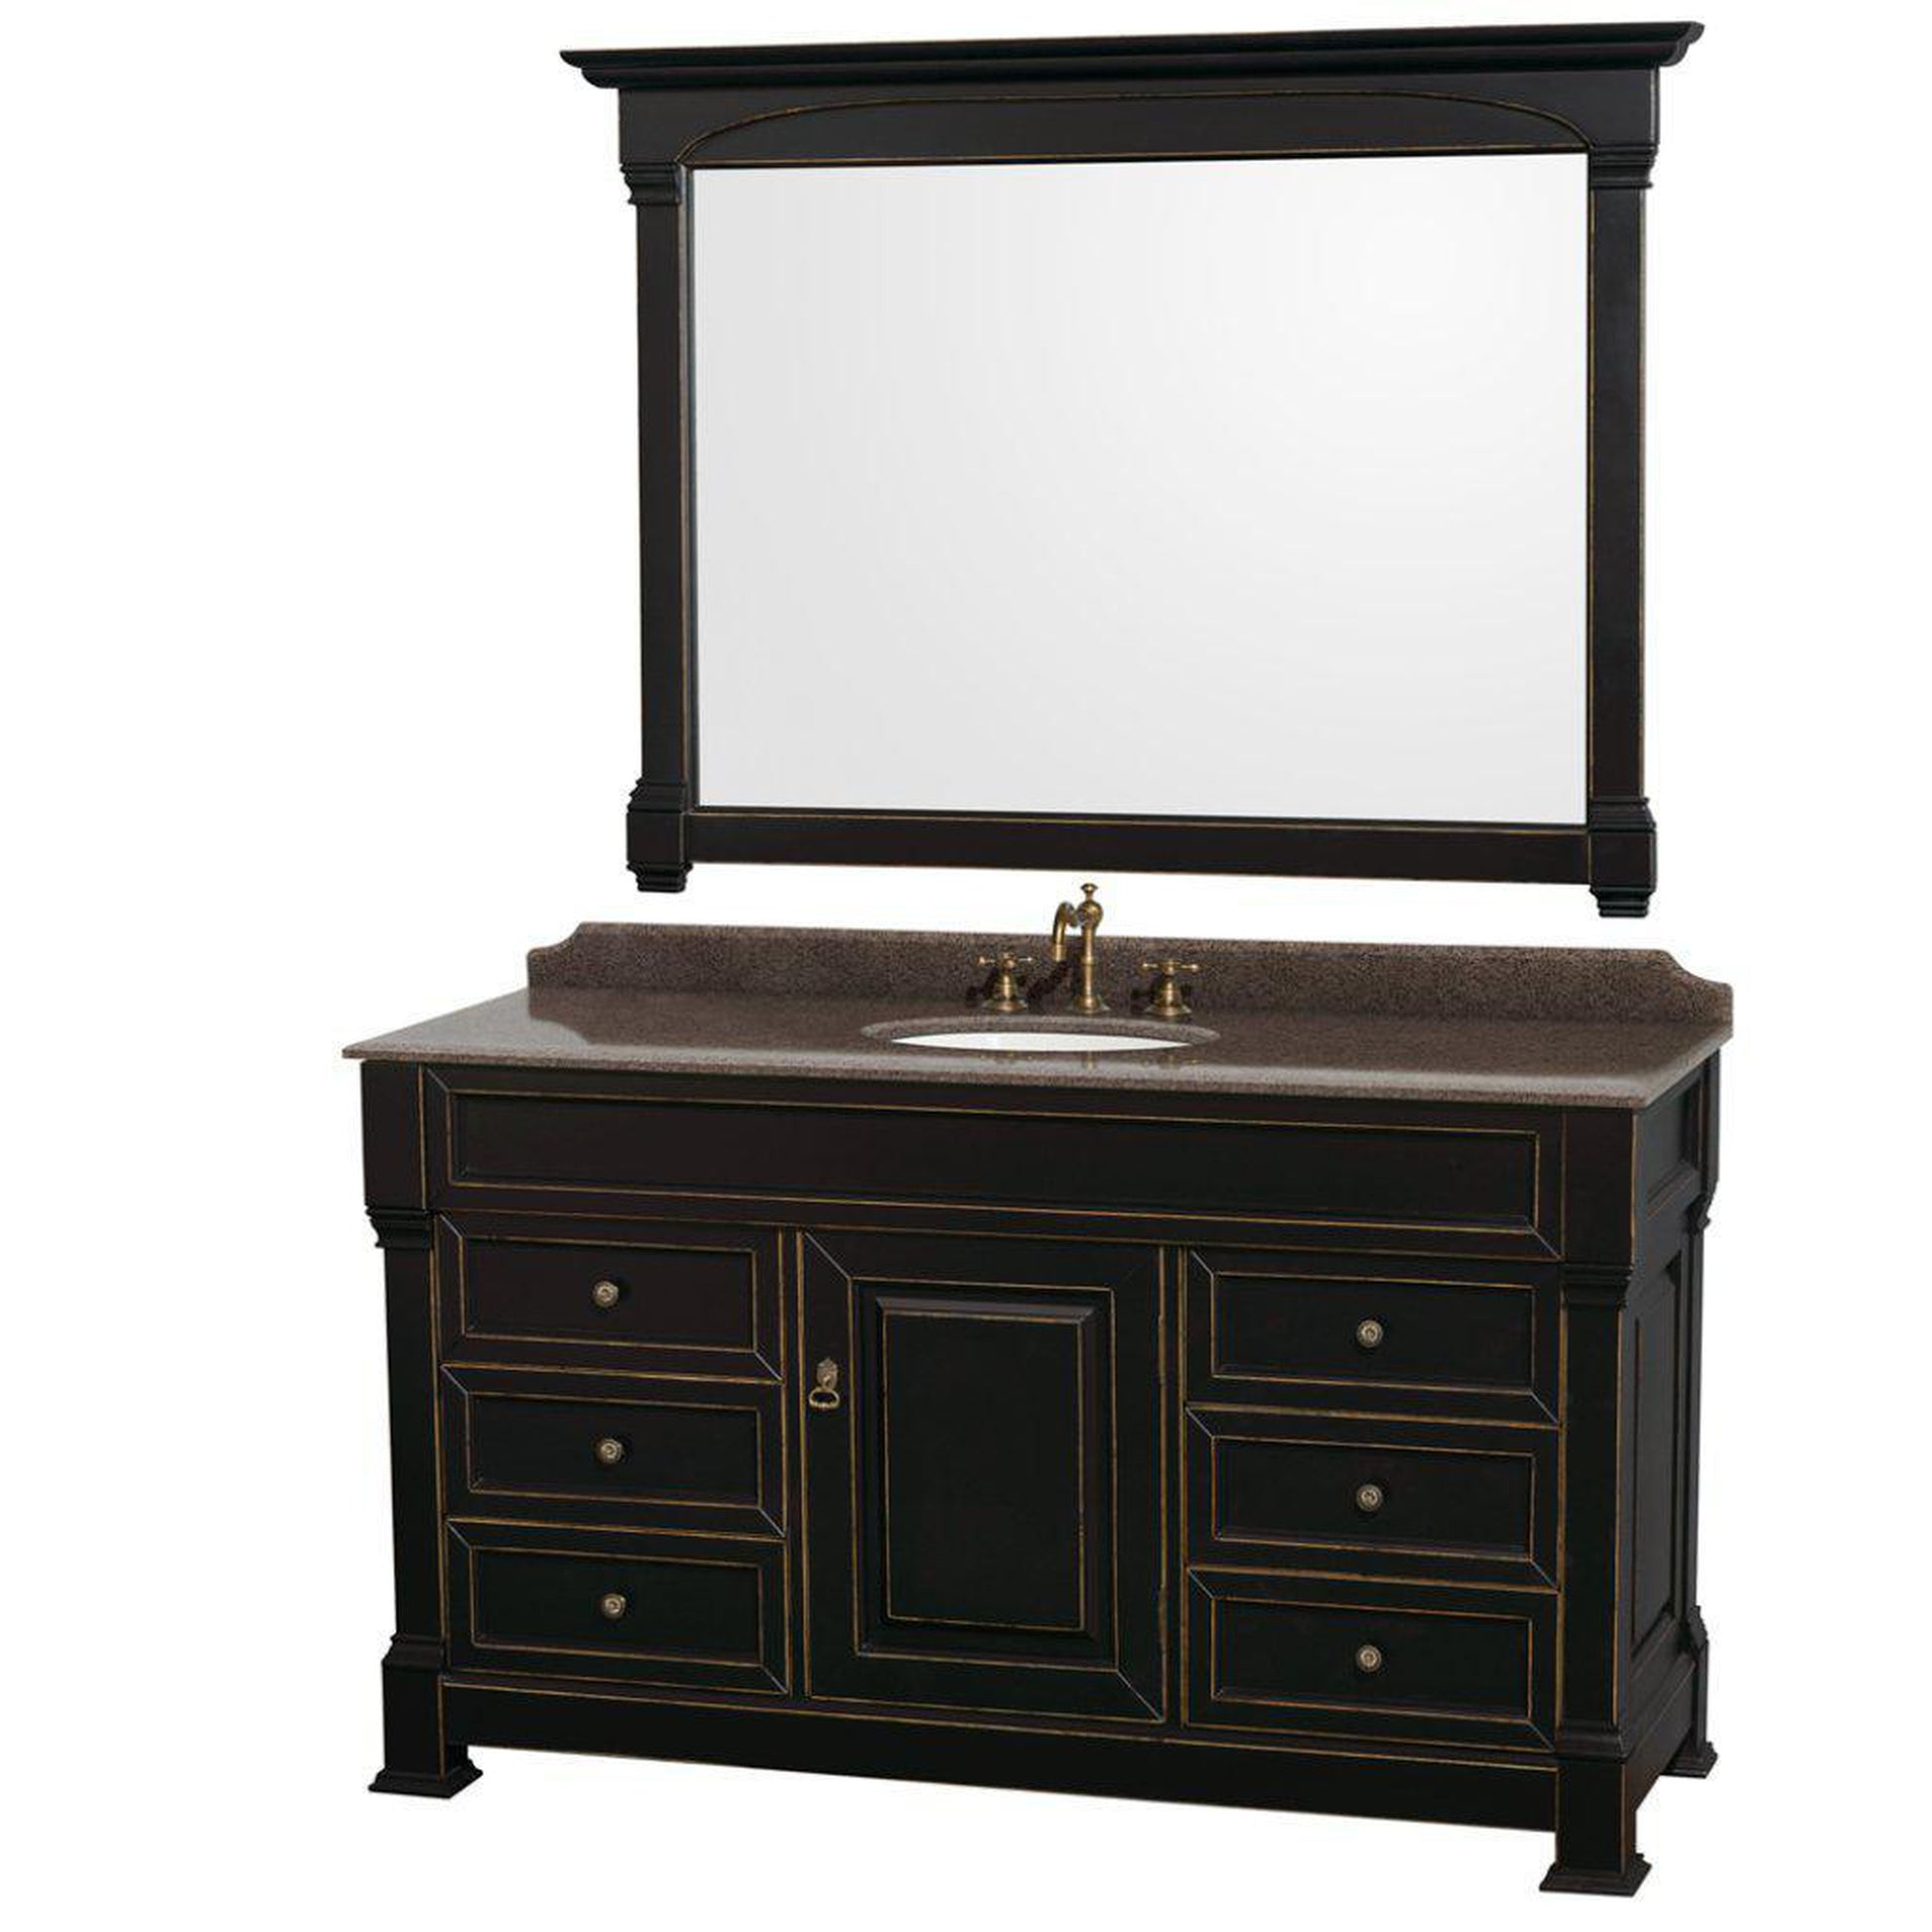 Wyndham Collection Andover 60" Single Bathroom Black Vanity With Imperial Brown Granite Countertop And Undermount Oval Sink, And 56" Mirror